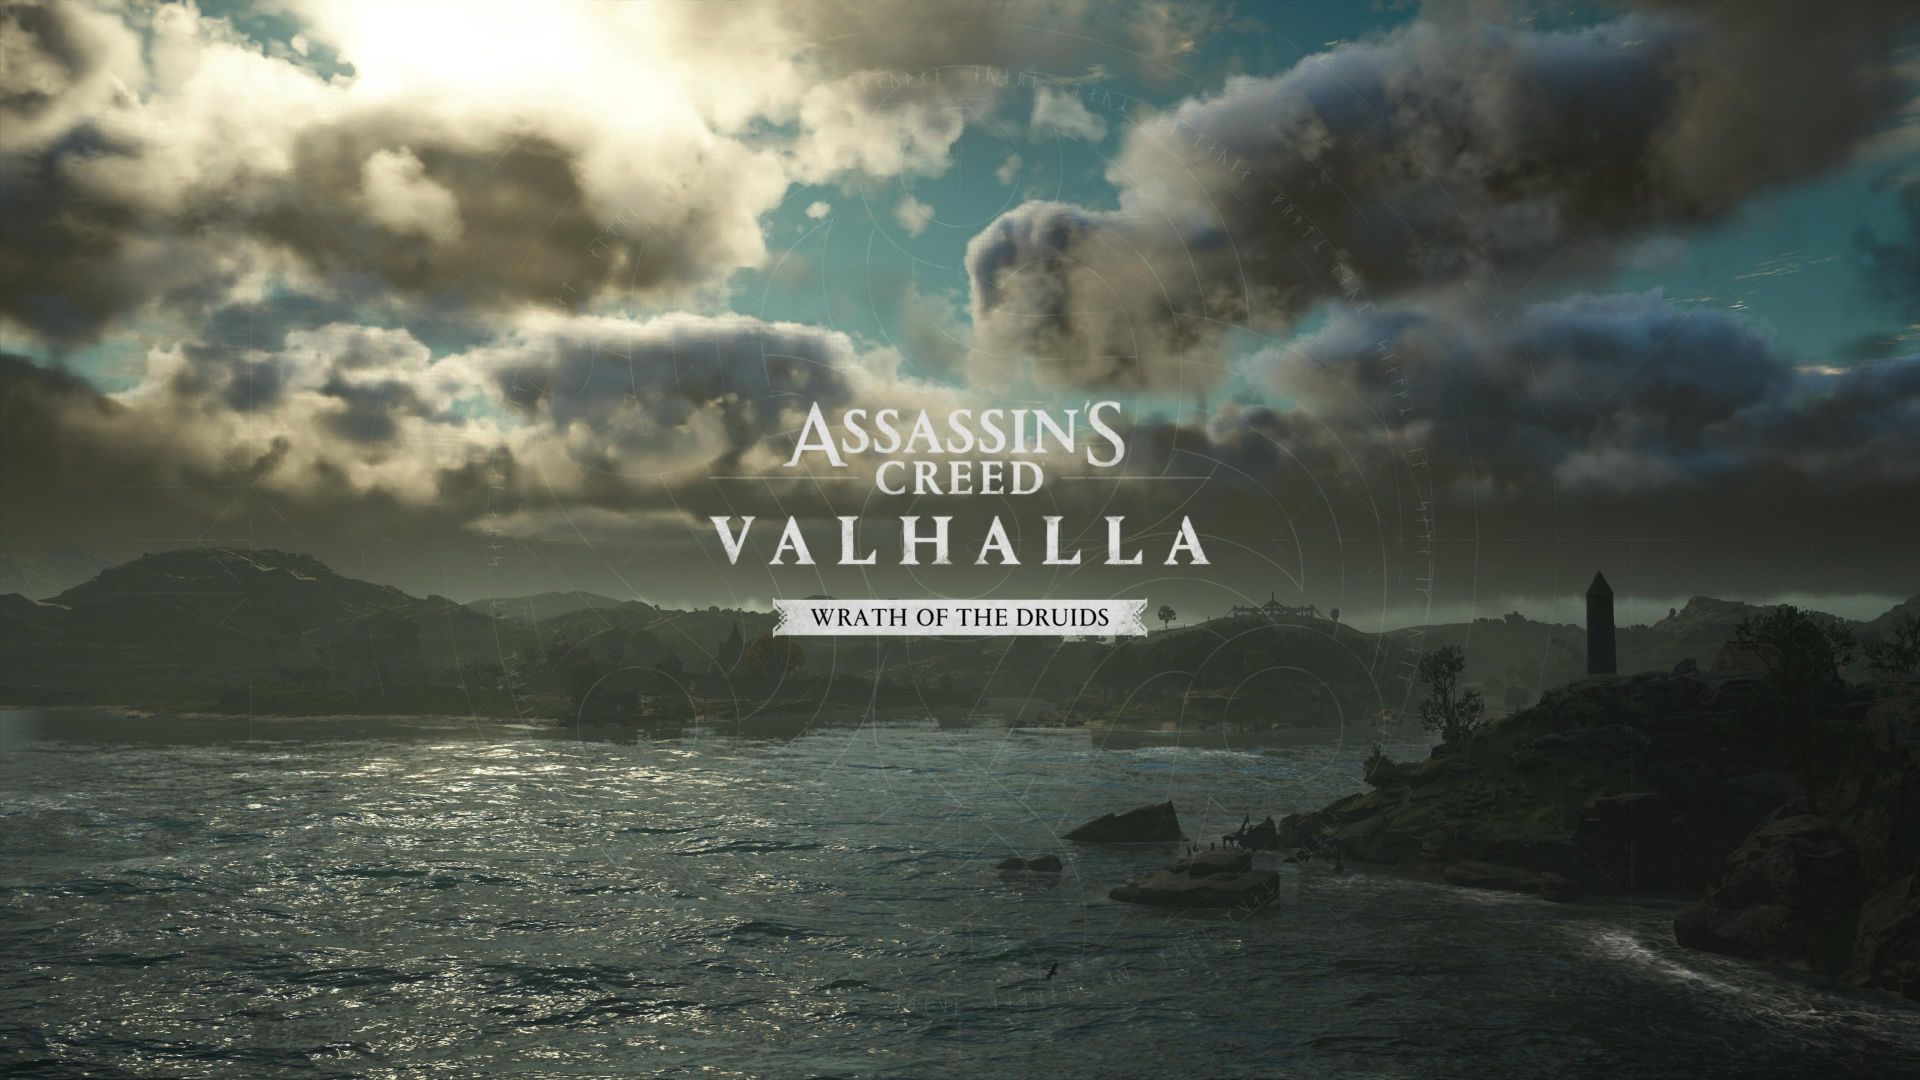 Assassins Creed Valhalla: Wrath of the Druids Review